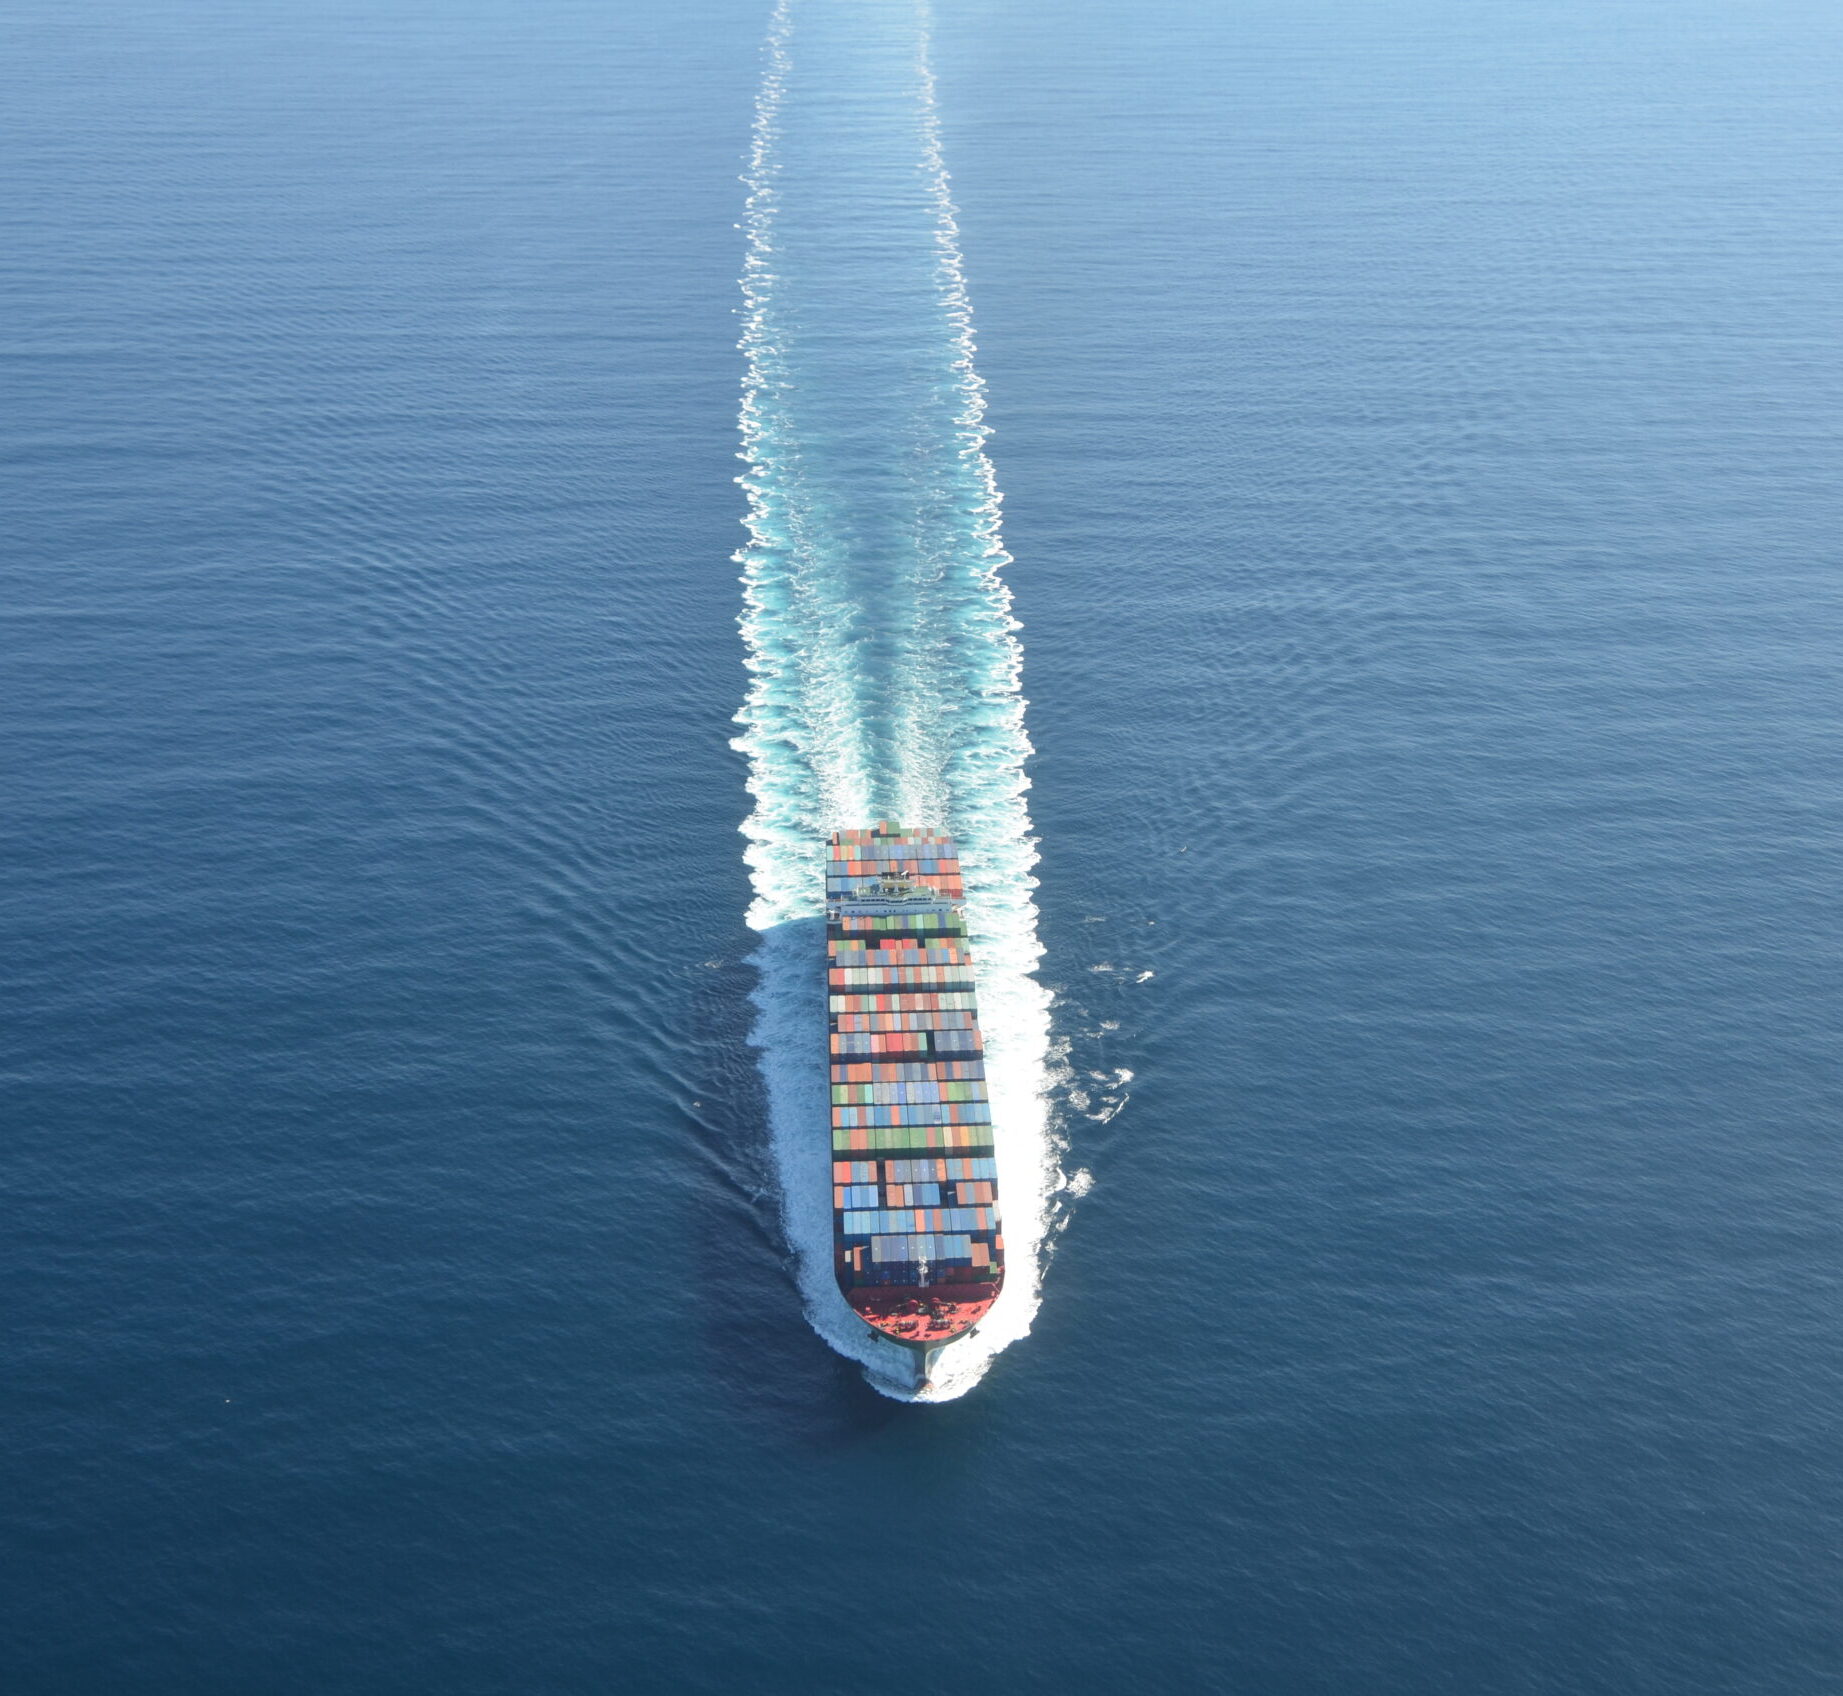 Large cargo ship sails toward the out edge of the photo frame.